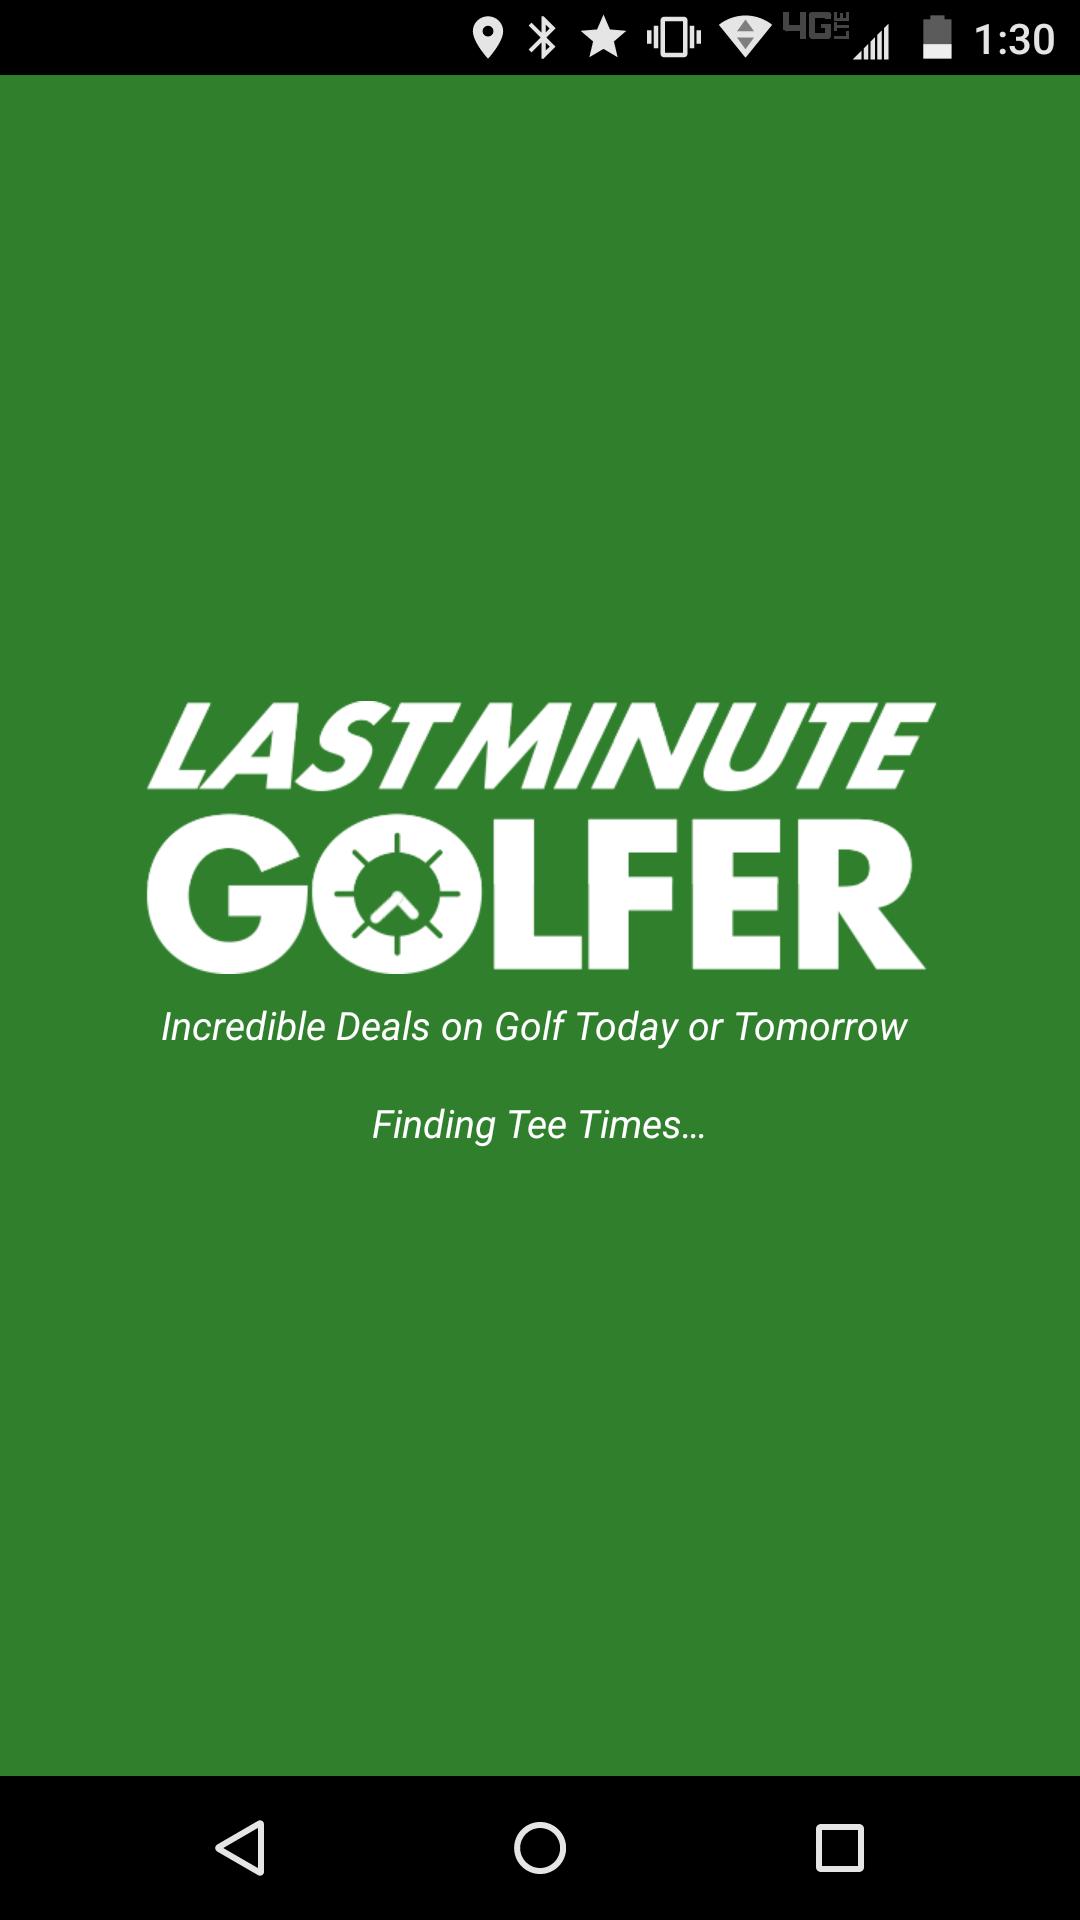 Last Minute Golfer for Android - APK Download